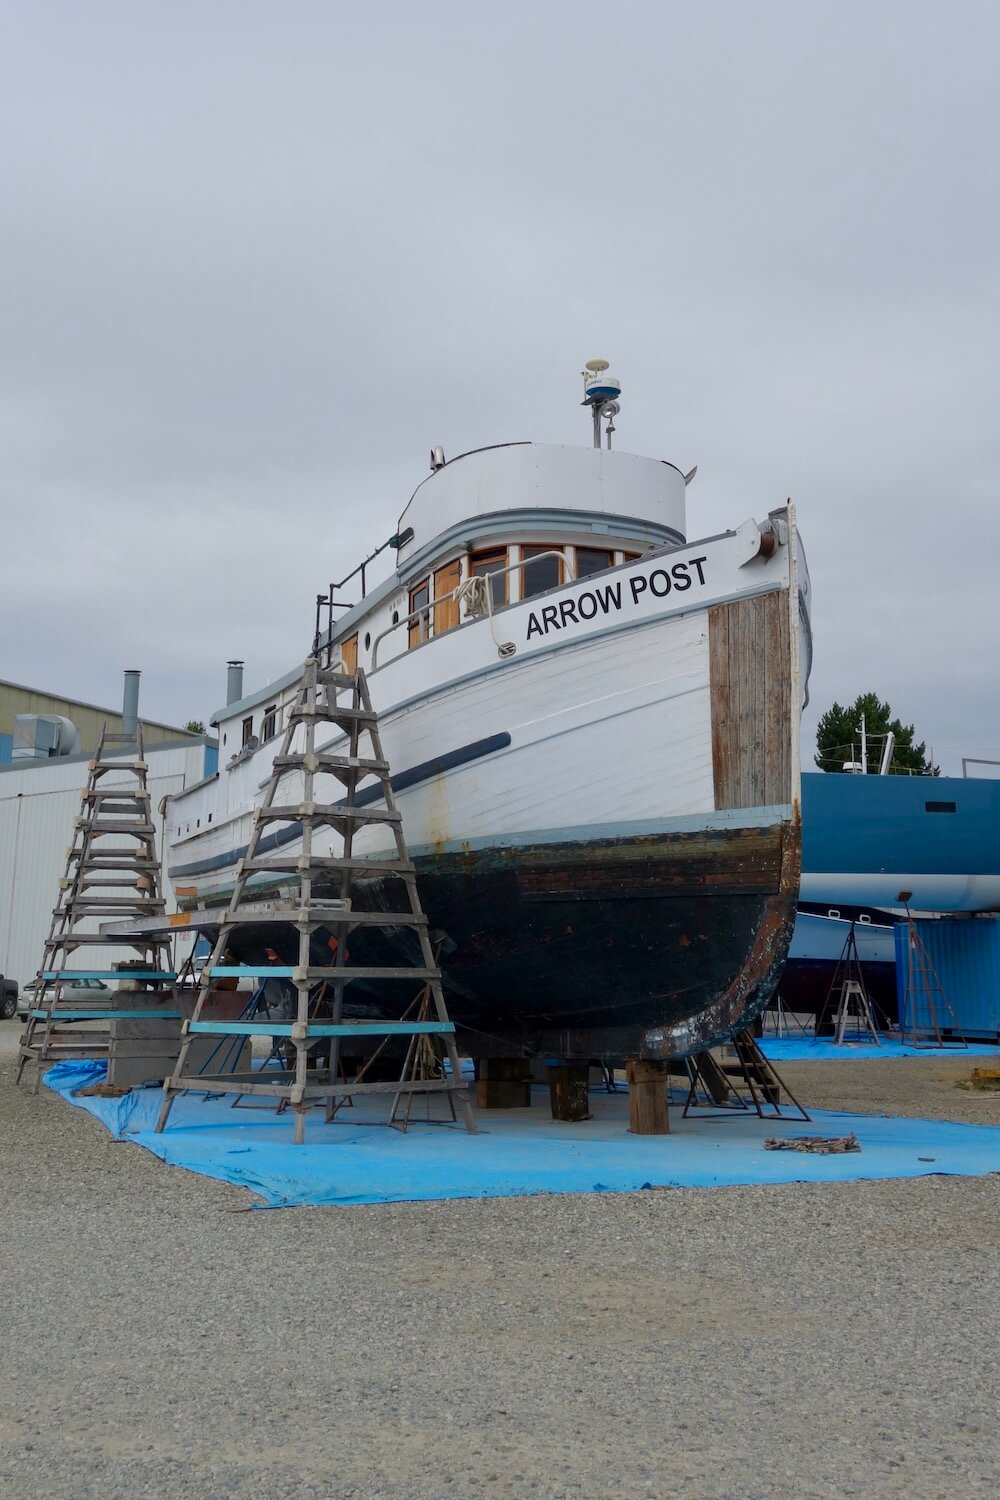 A boat sits, propped up on a dry dock in Port Townsend, Washington. The hull has barnacles and is painted a dull red while above the line the paint is fresh white. The boat's name is Arrow Post and there are several ladders on either side.